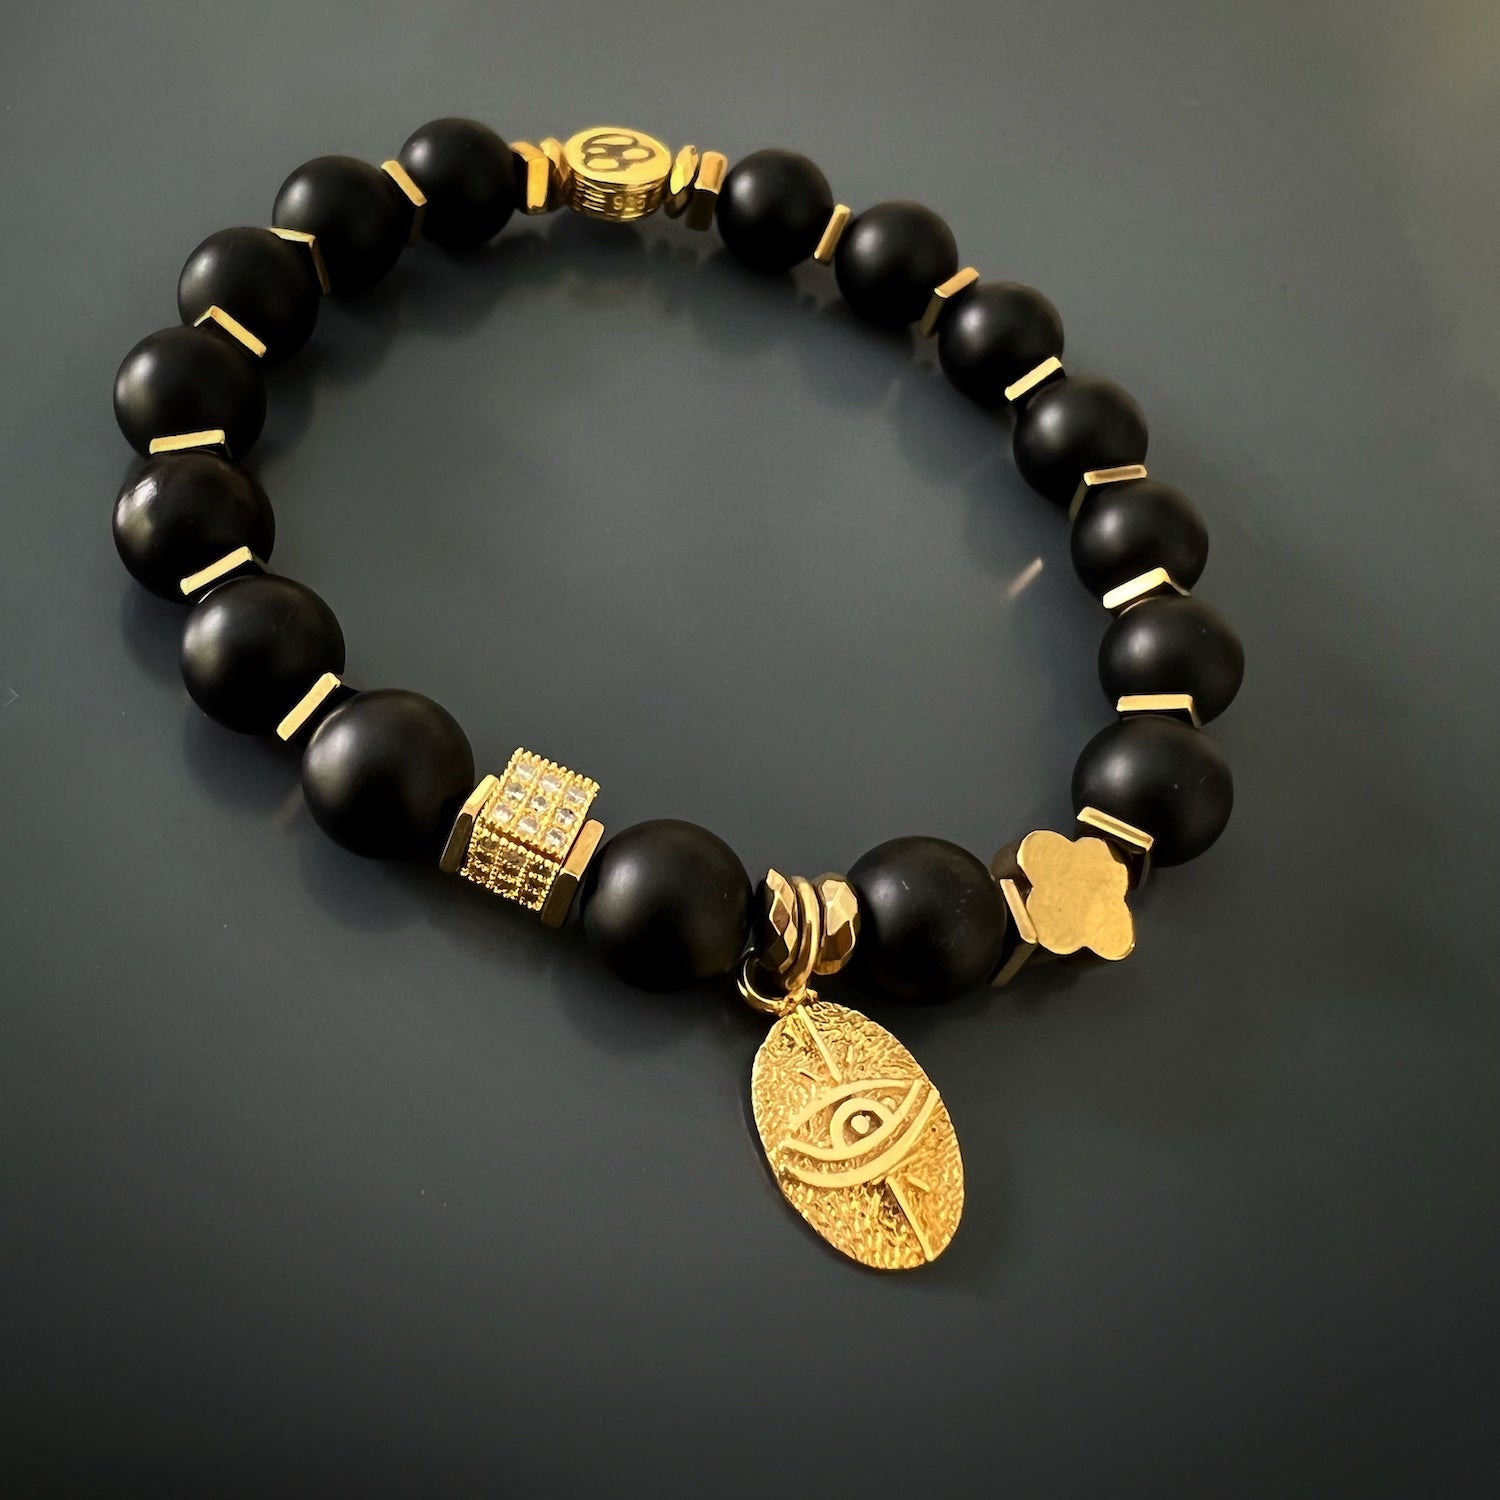 The Onyx Unique Eye Bracelet is a symbol of spiritual awakening and protection, perfect for those seeking positive energy.